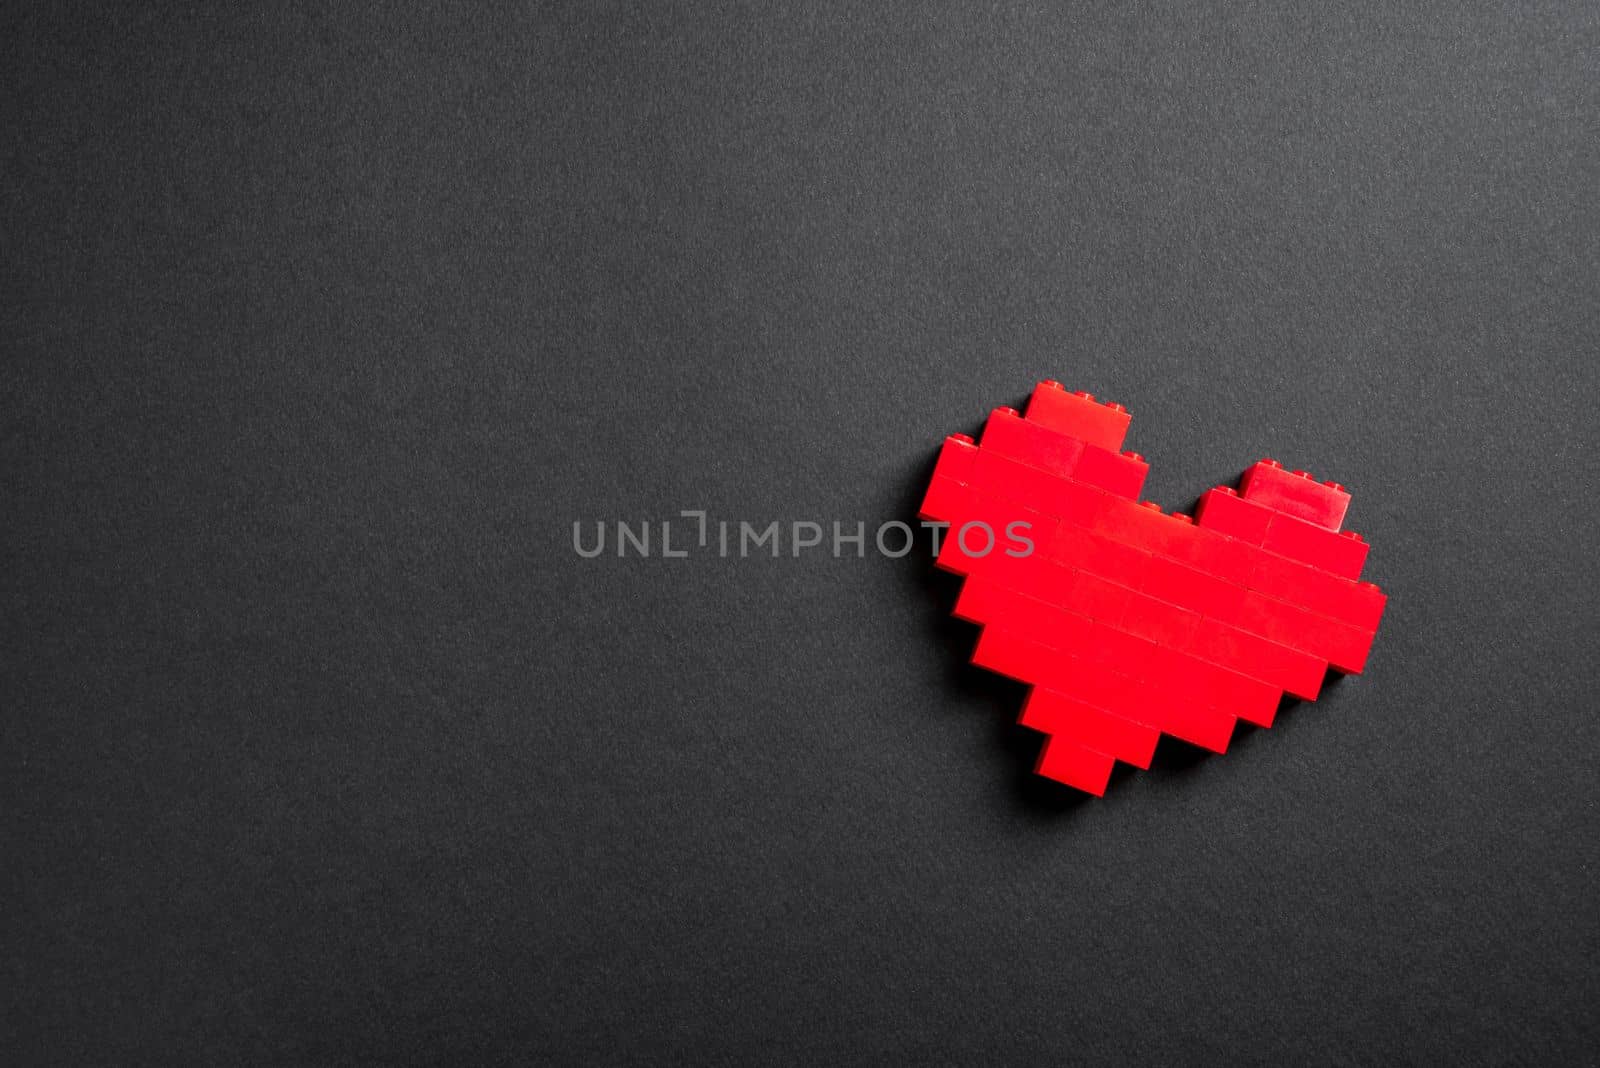 Red heart made of plastic bricks on a dark gray background by Sonat